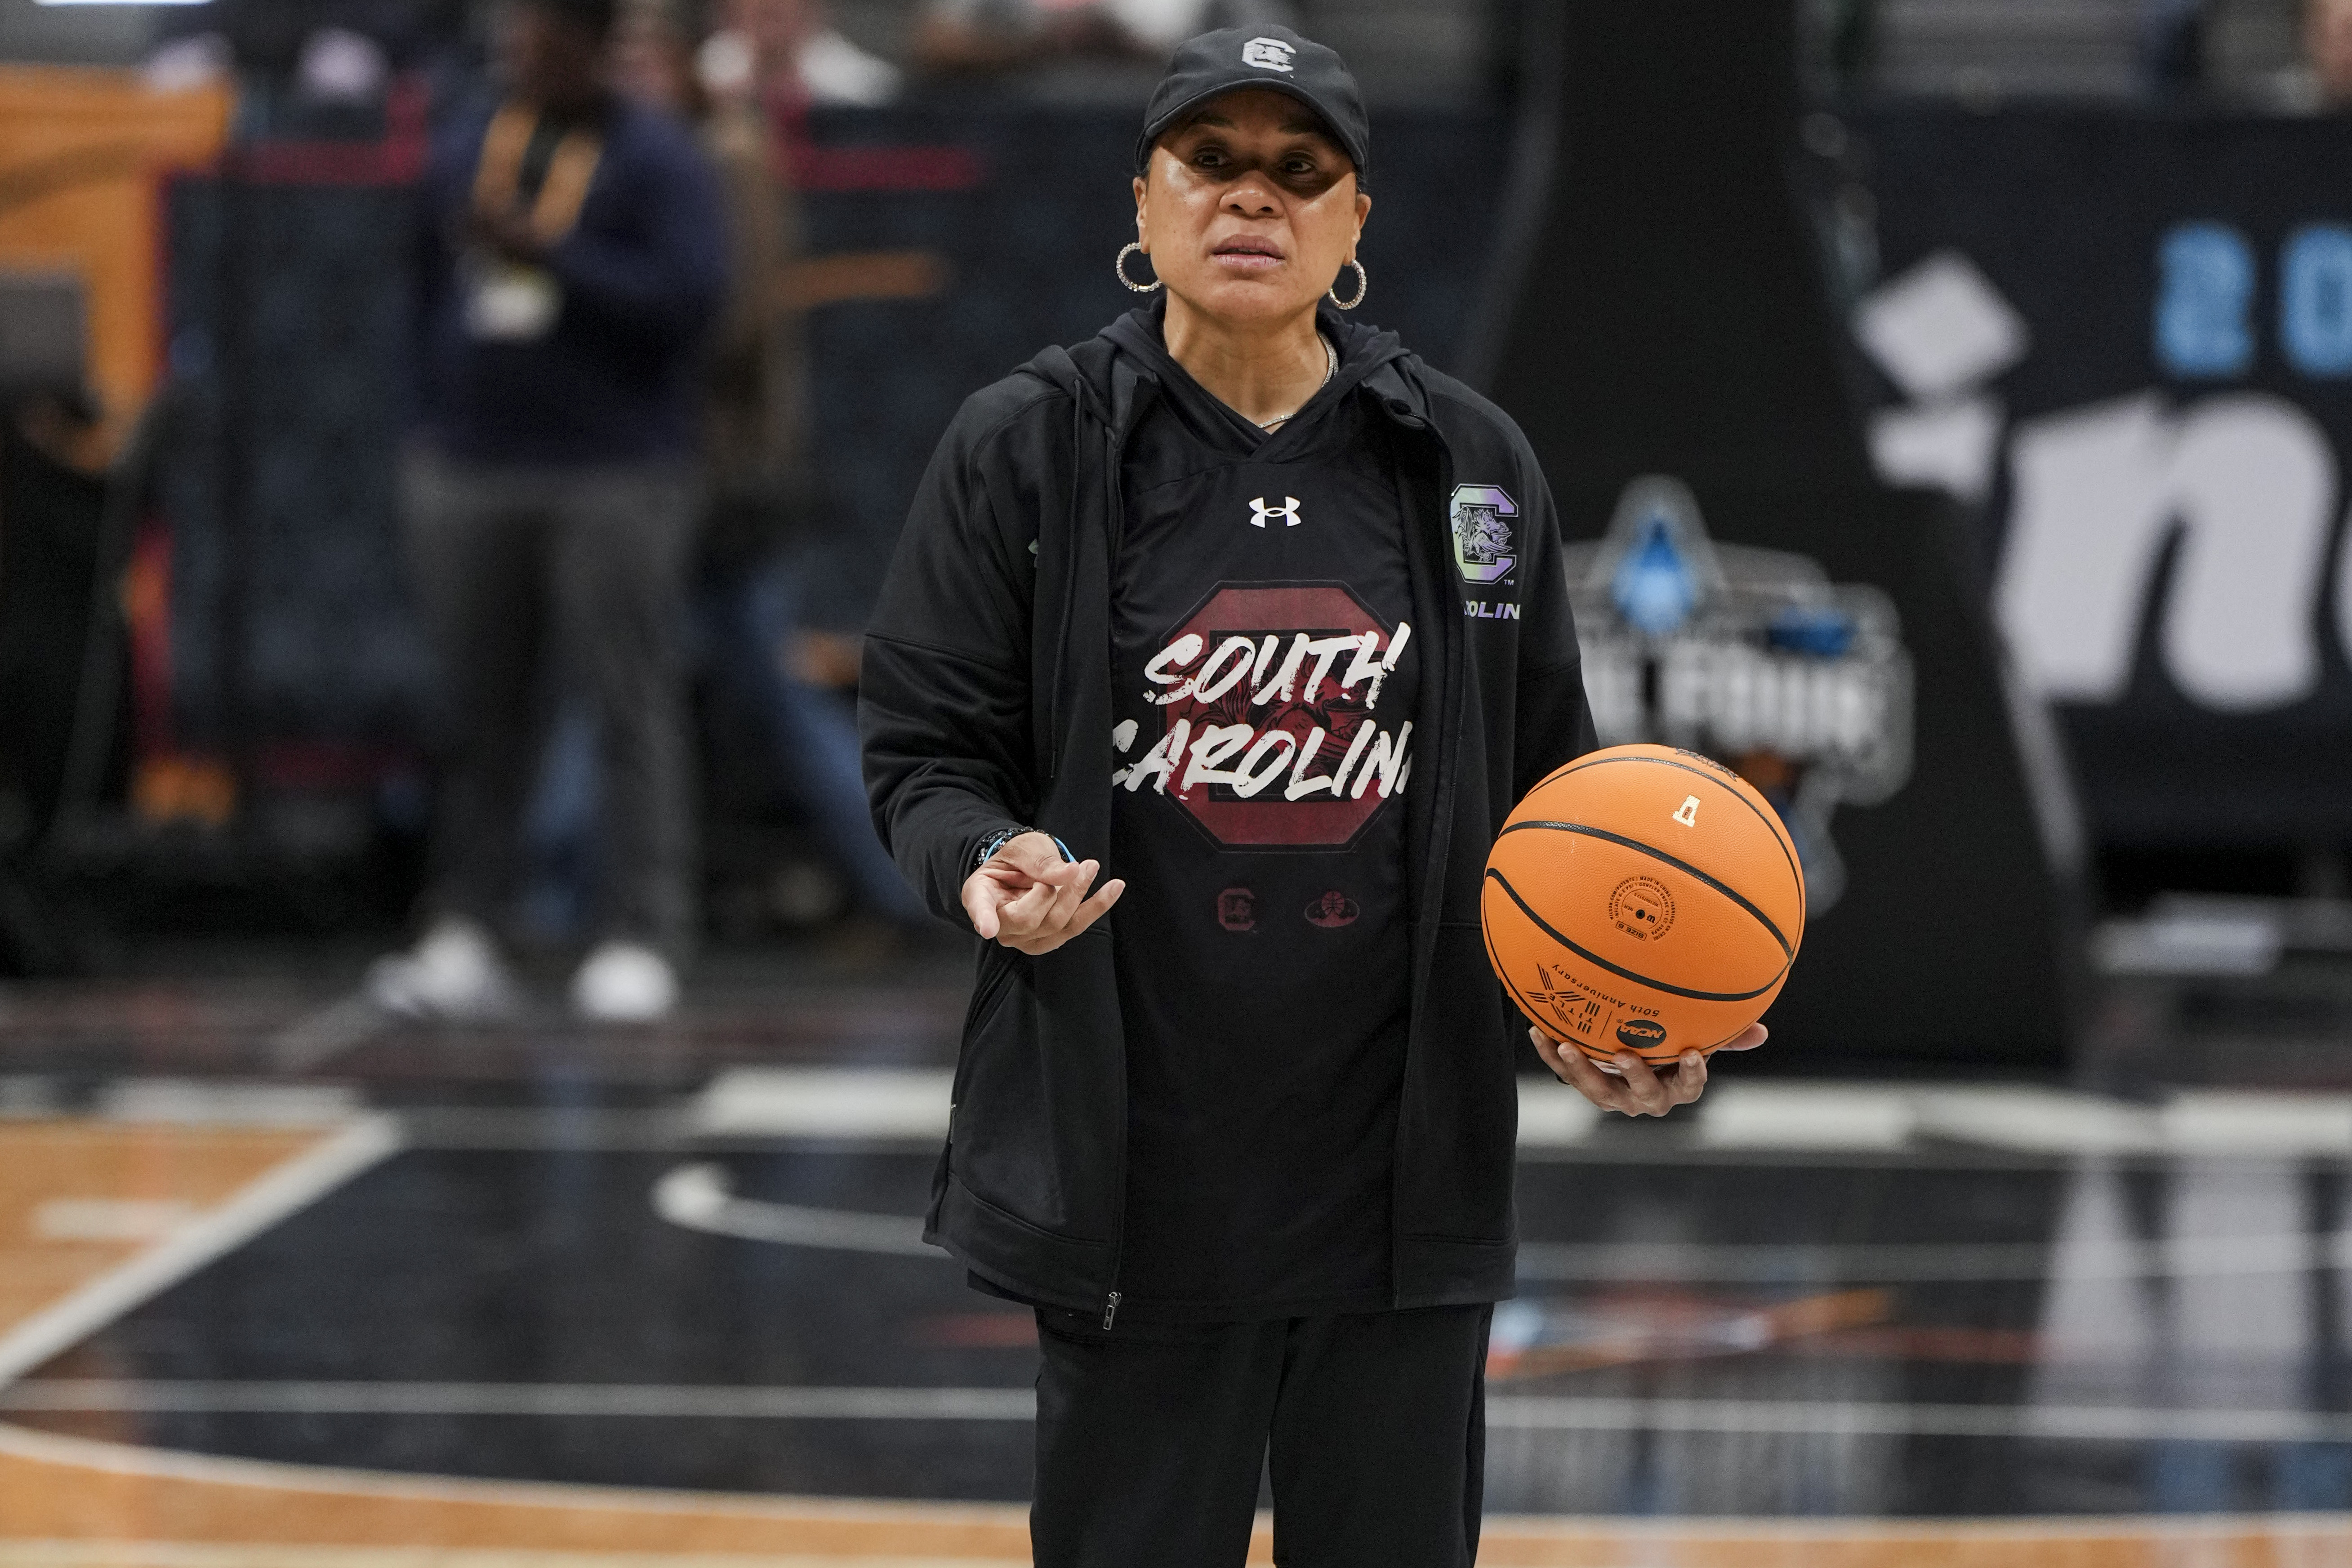 South Carolina Gamecocks head coach Dawn Staley stands on the court during team practice at American Airlines Center.